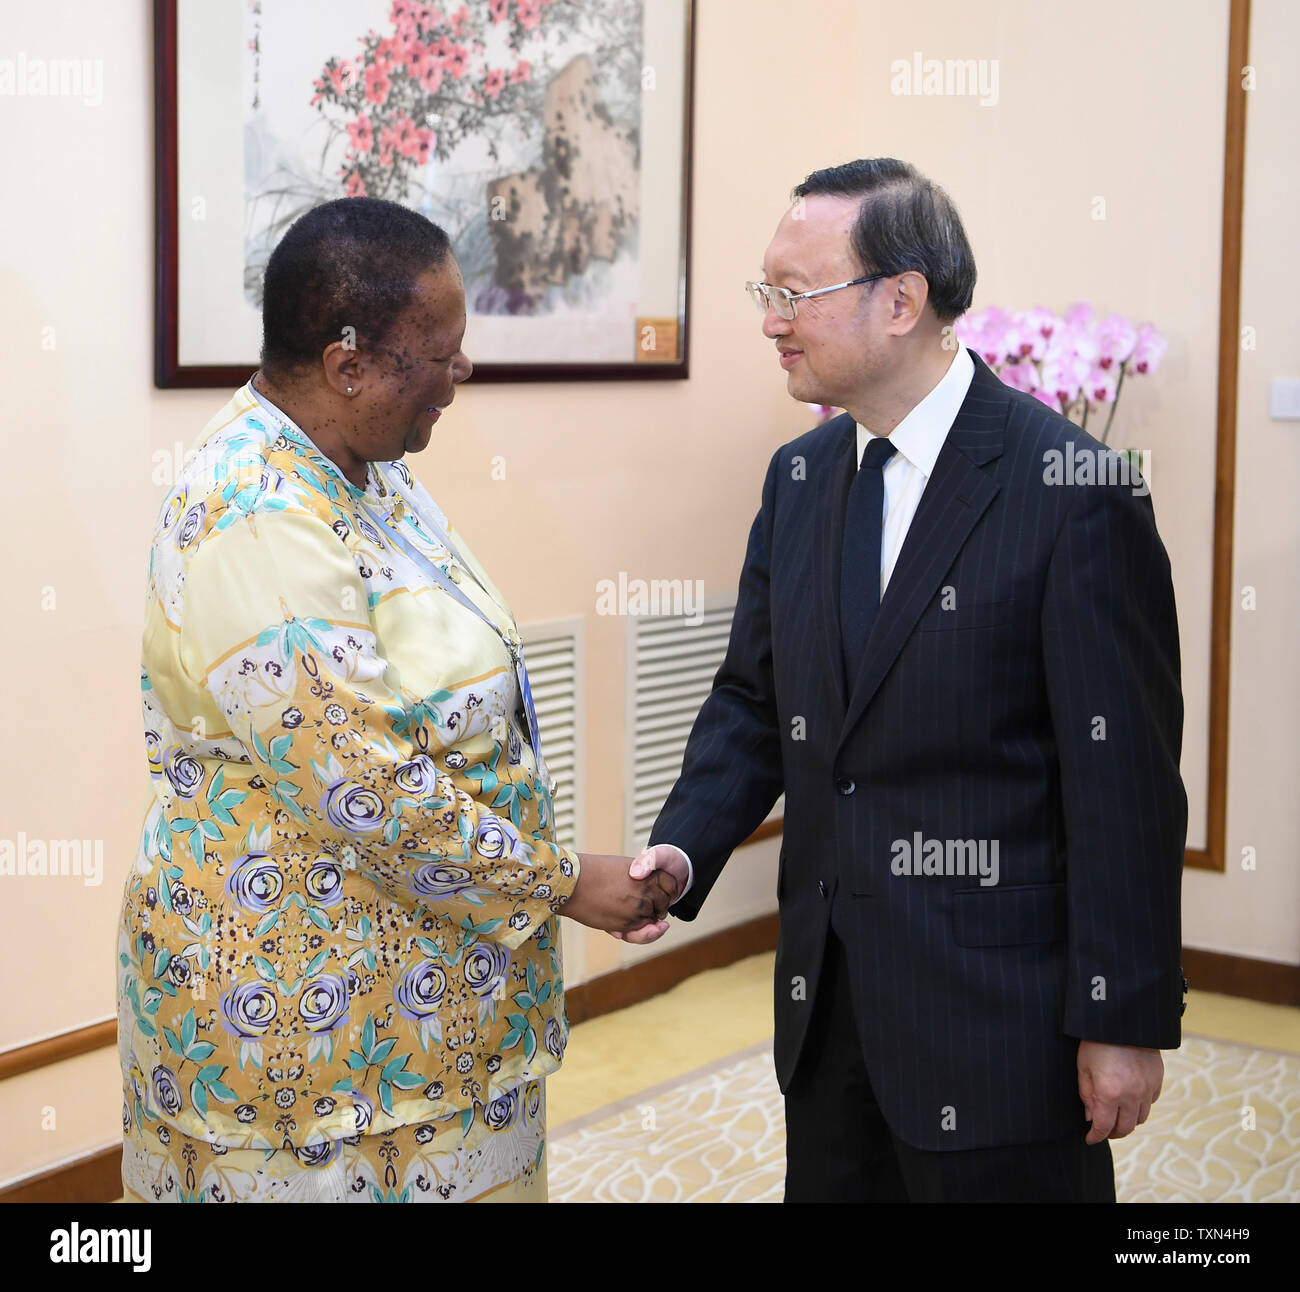 Beijing, China. 25th June, 2019. Yang Jiechi, a member of the Political Bureau of the Central Committee of the Communist Party of China (CPC) and director of the Office of the Foreign Affairs Commission of the CPC Central Committee, meets with South African Foreign Minister Naledi Pandor in Beijing, capital of China, June 25, 2019. Credit: Zhang Ling/Xinhua/Alamy Live News Stock Photo